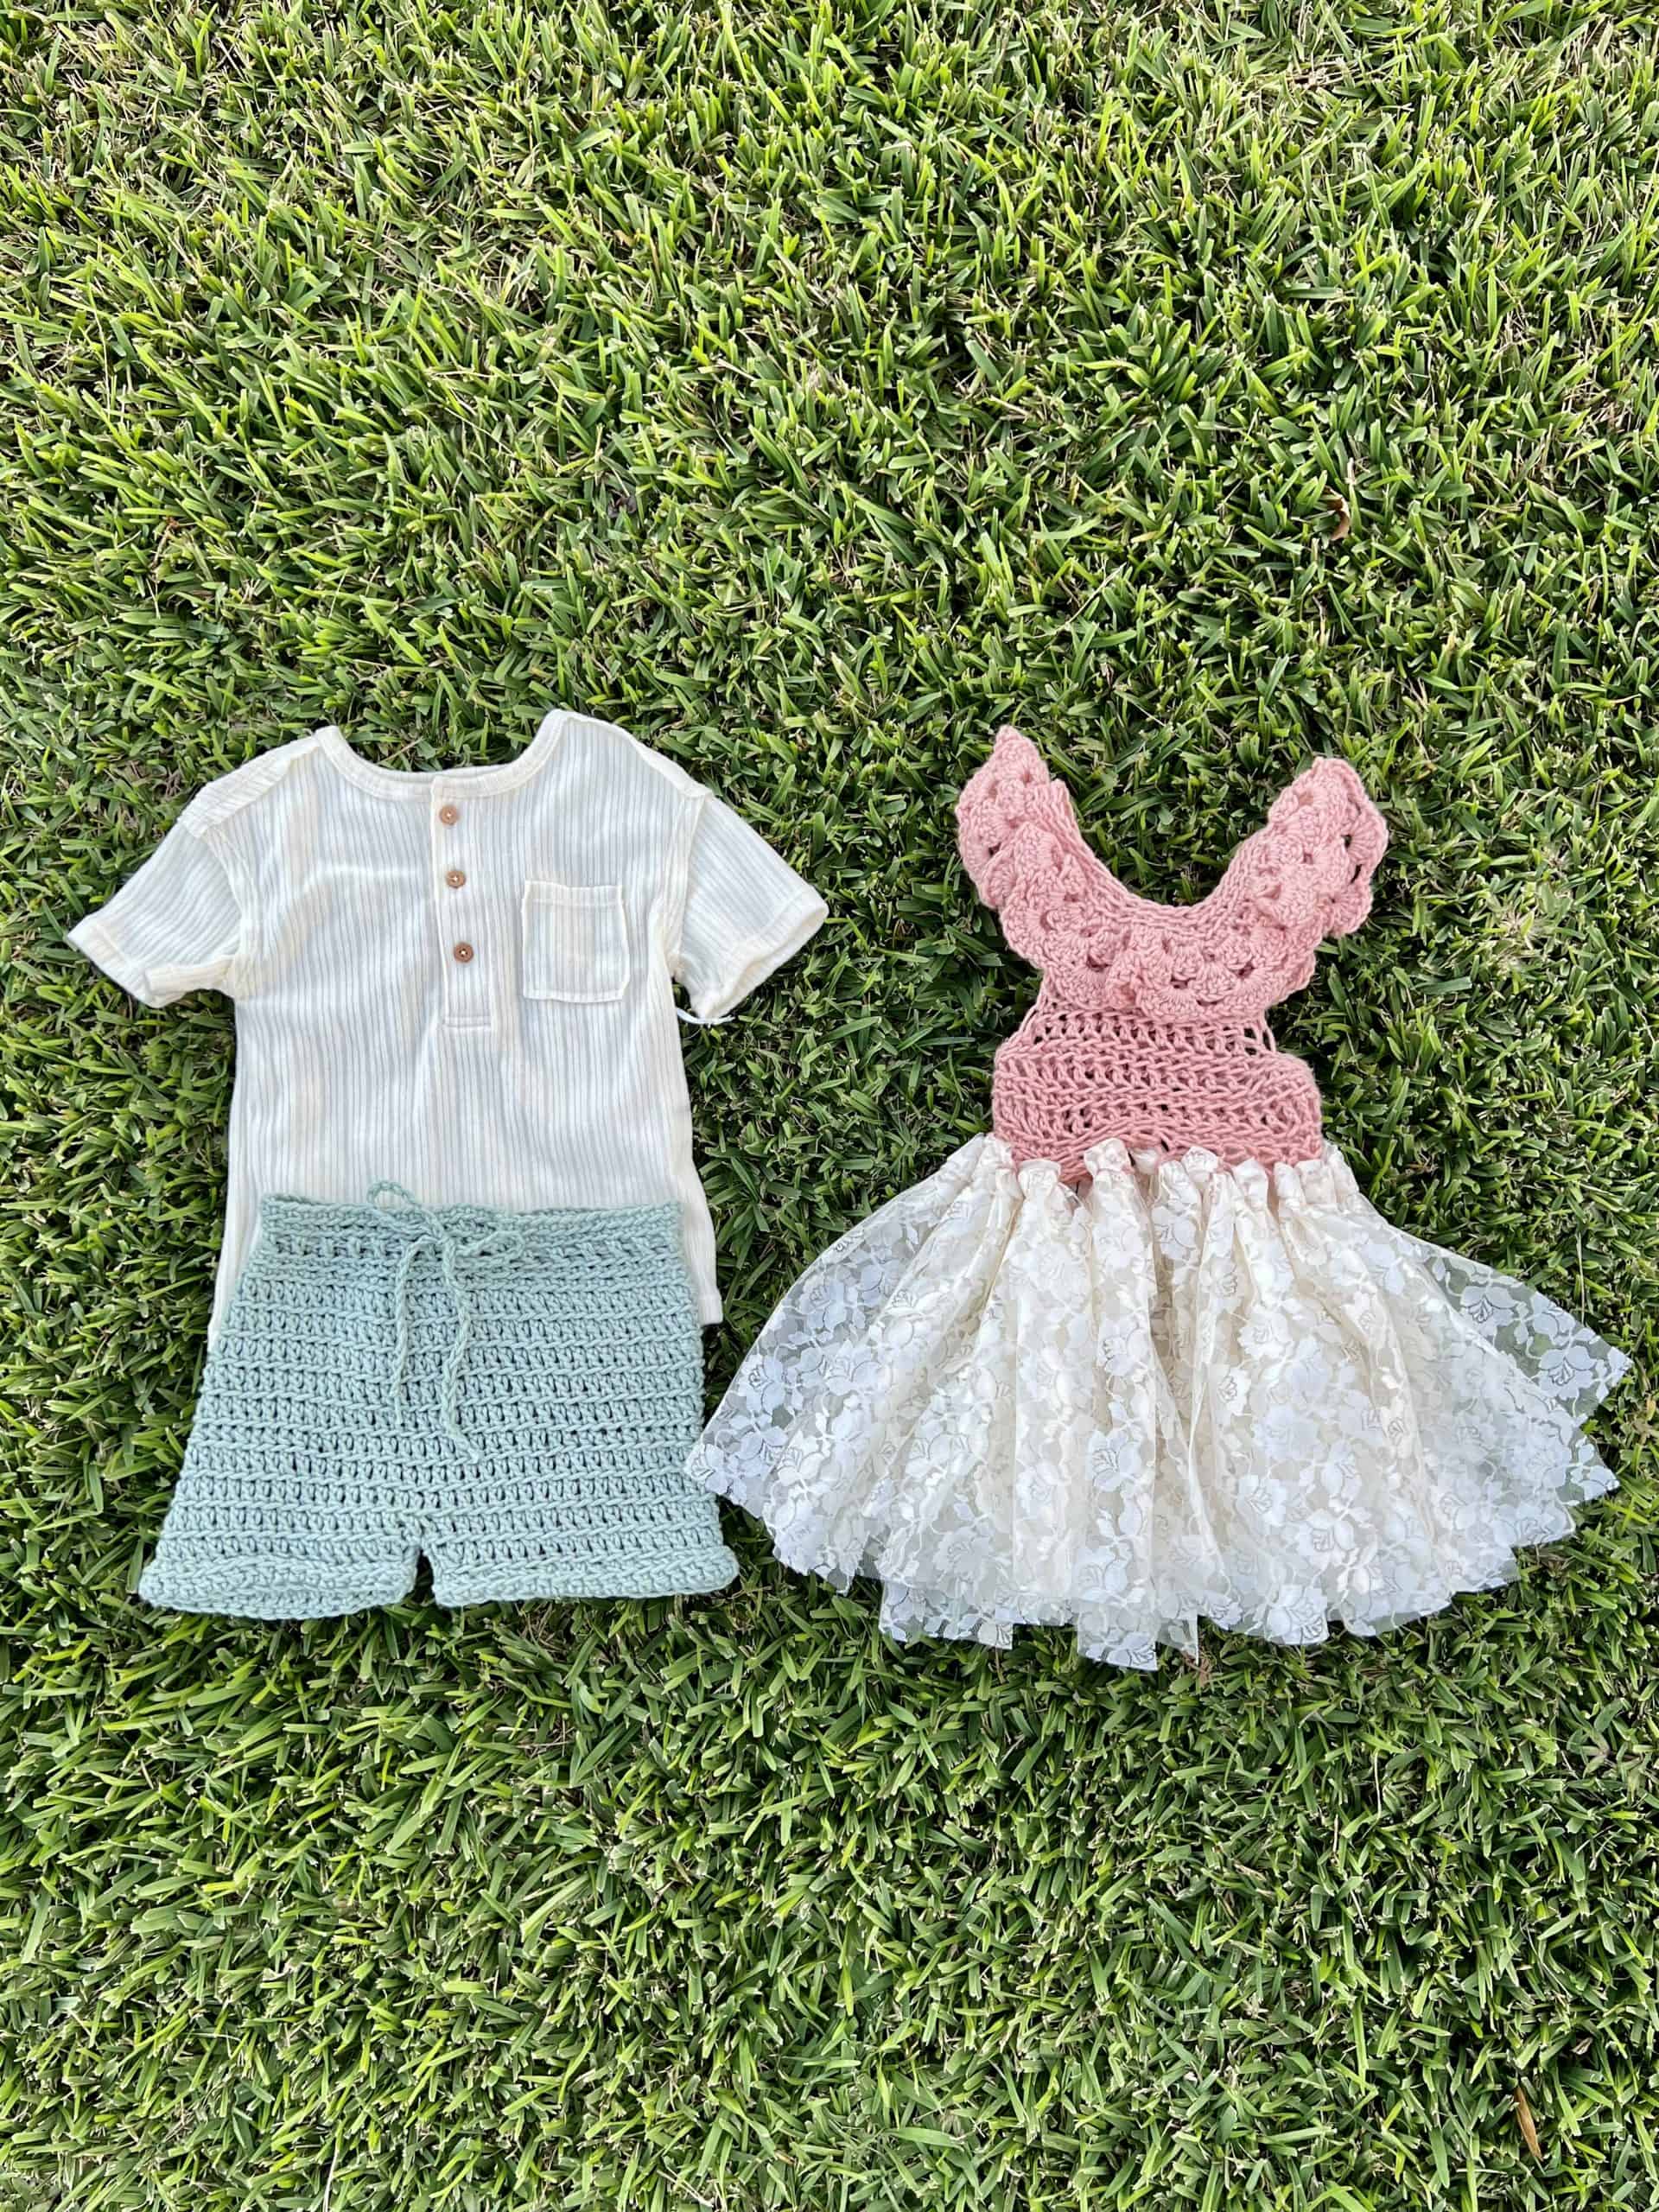 How to create and crochet coordinating outfits for kids (both boys and girls). Find inspiration, patterns, and tips. Perfect for family photo shoots and can easily be passed down to future generations!